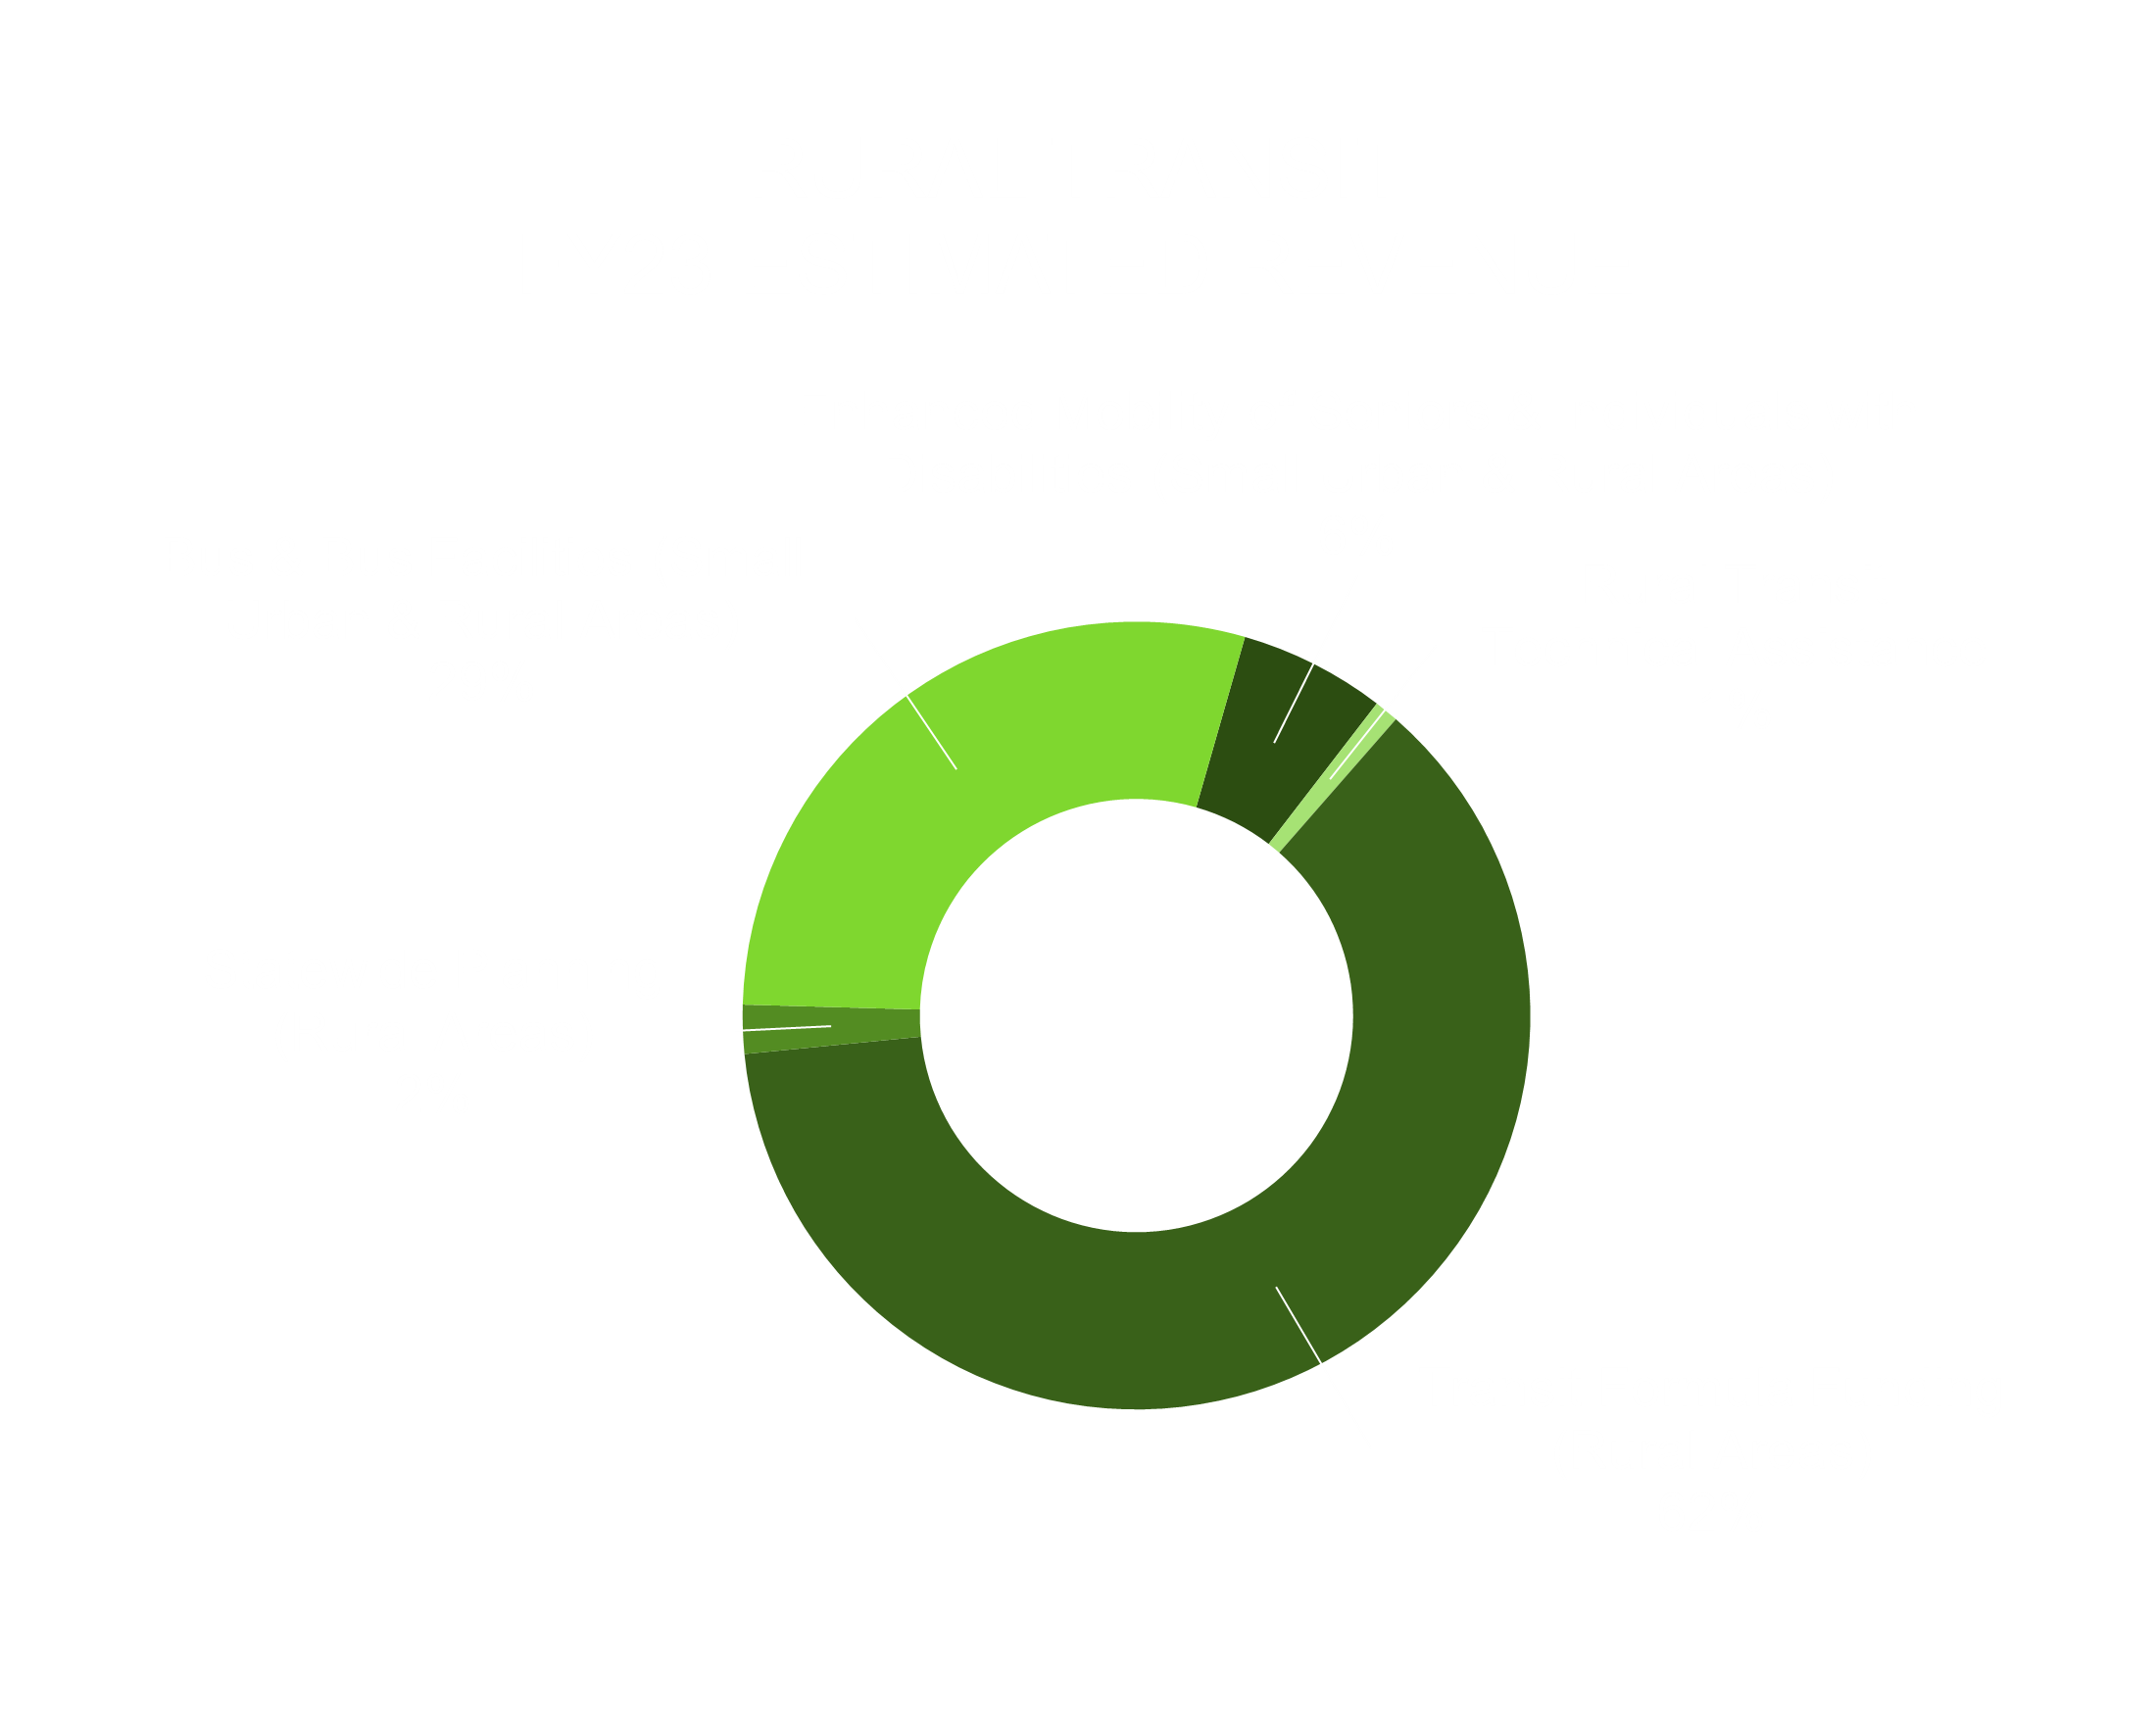 Rural Transit Estimated Revenue Fiscal Year 2020 Chart shows Transit Formula Funding in rural areas 61%, Bus and Bus Facilities in small urban and rural areas 29%, Enhanced Mobility of Seniors and Individuals with Disabilities from small urban and rural areas 6%, 1% Rural Transit Technical Assistance, and Statewid Planning in rural areas 2%.